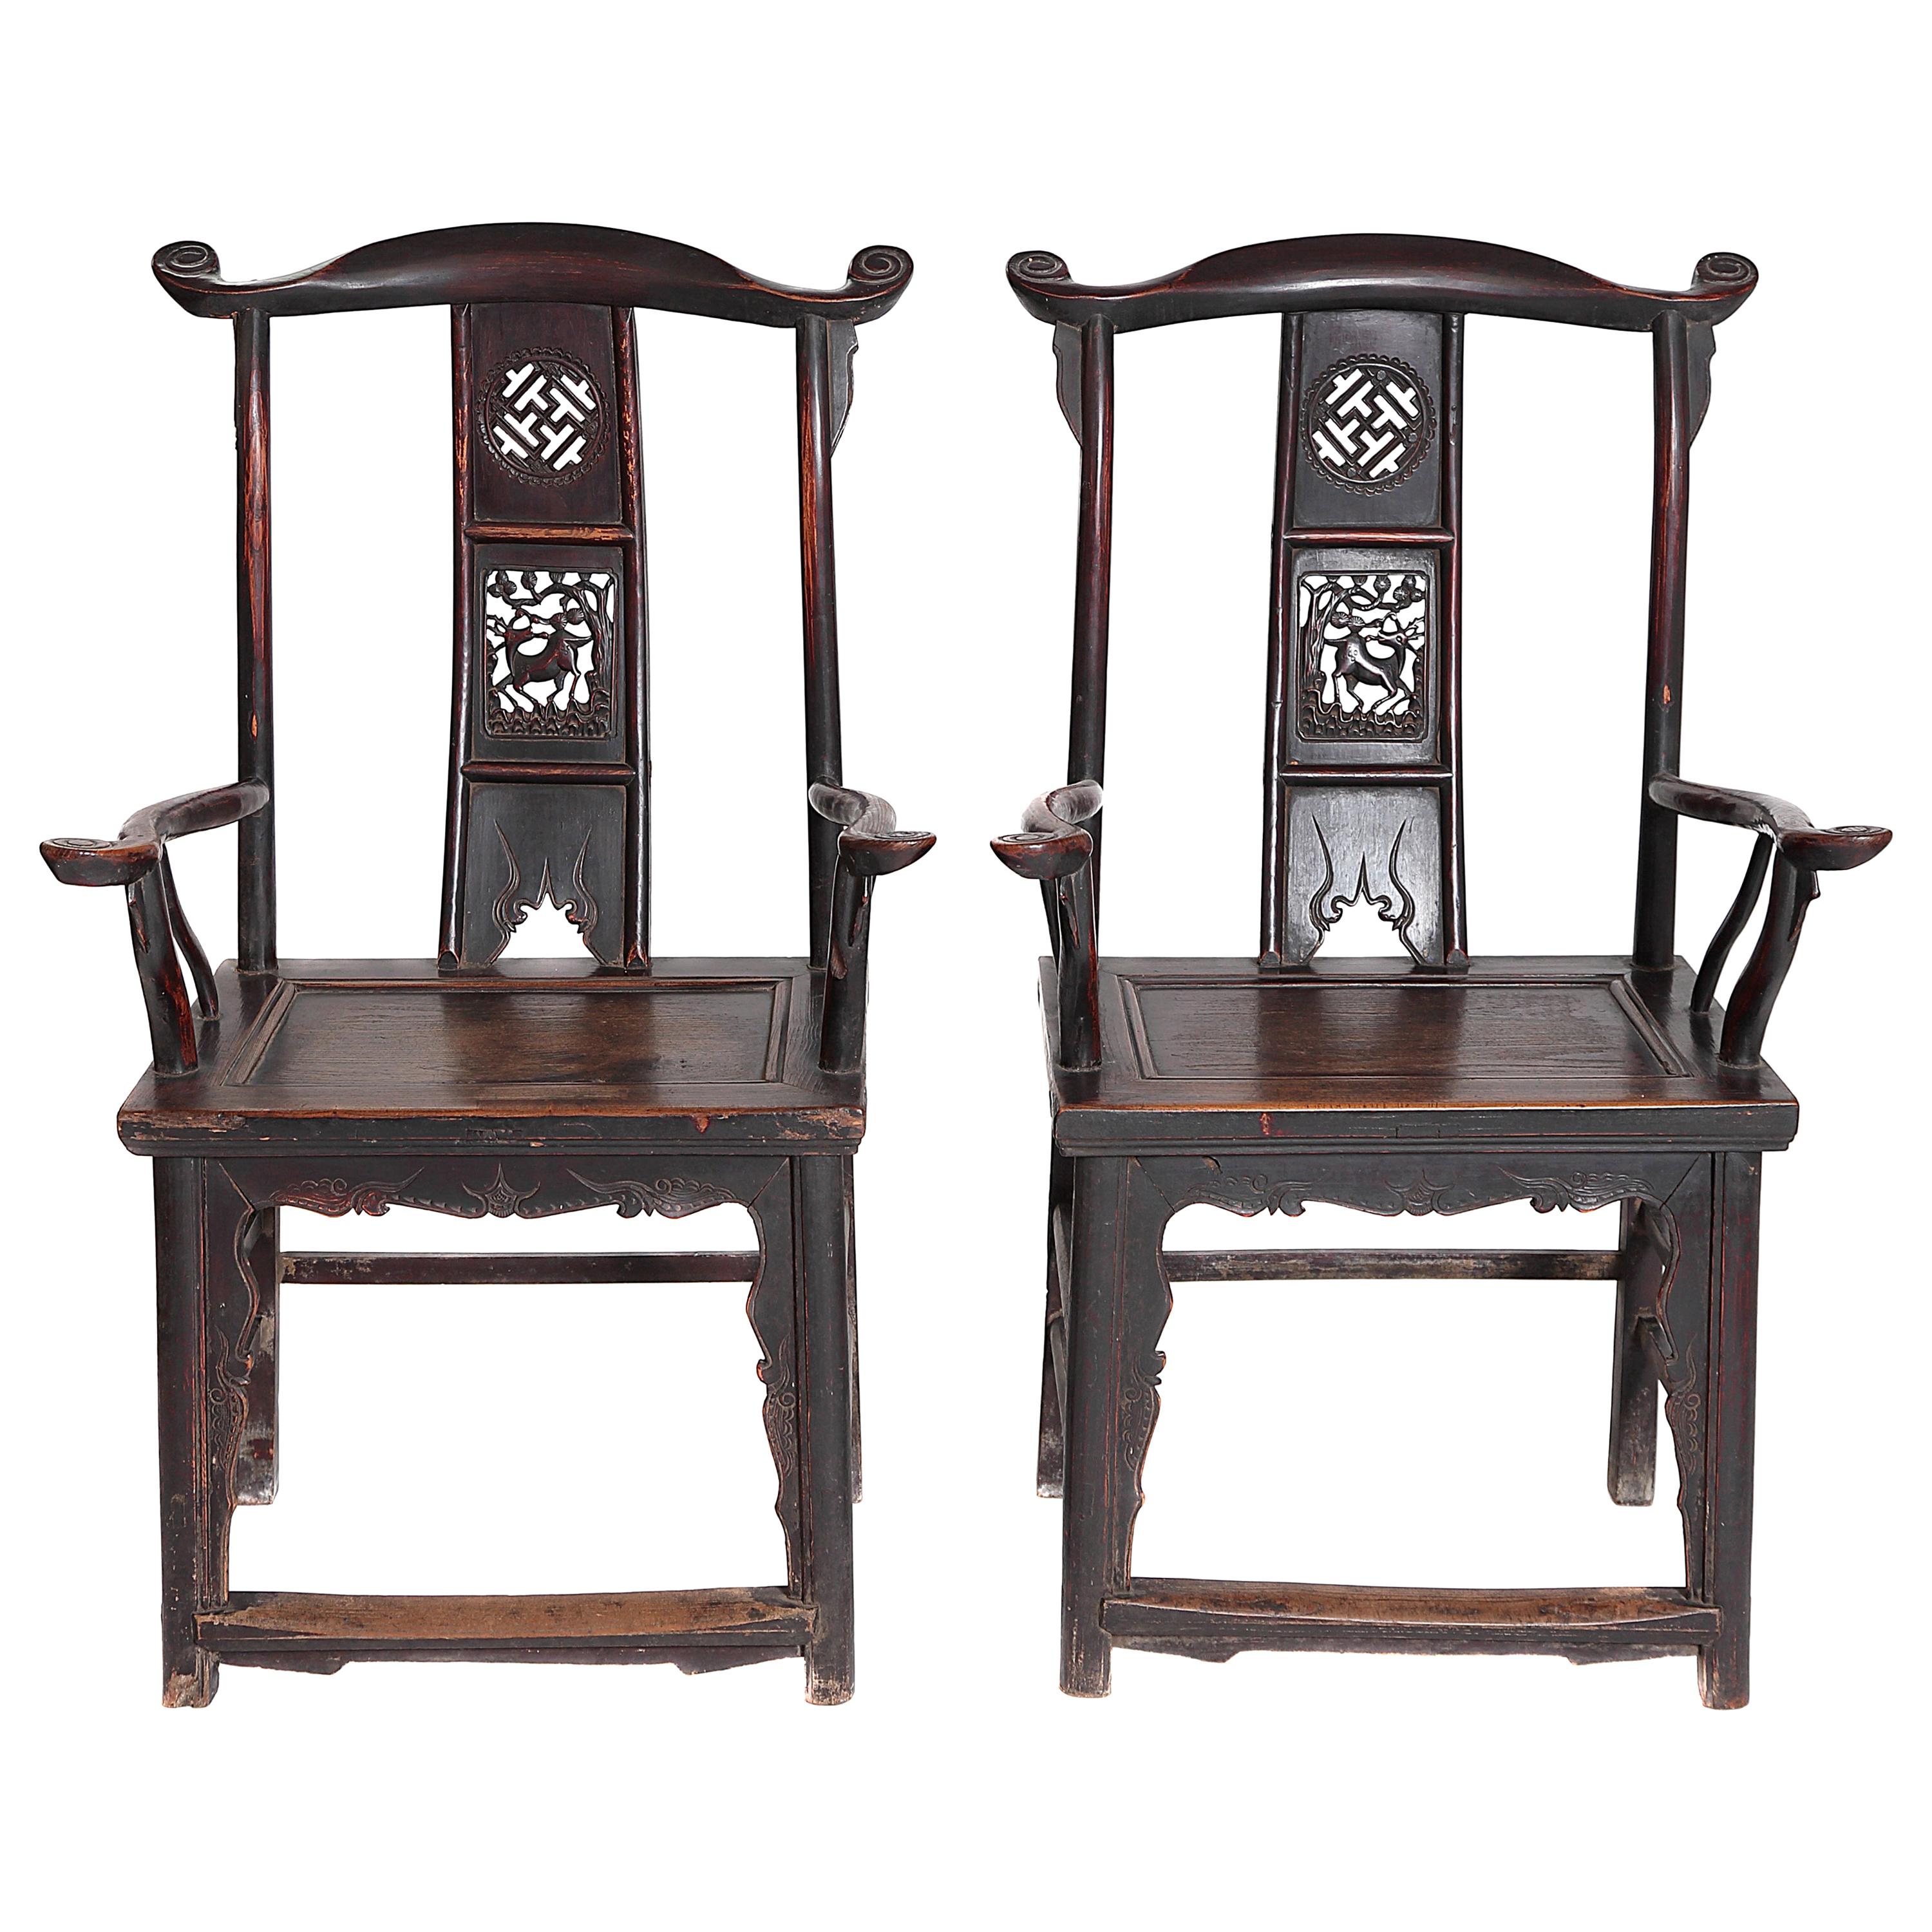 Pair of Chinese Scholar's Chairs